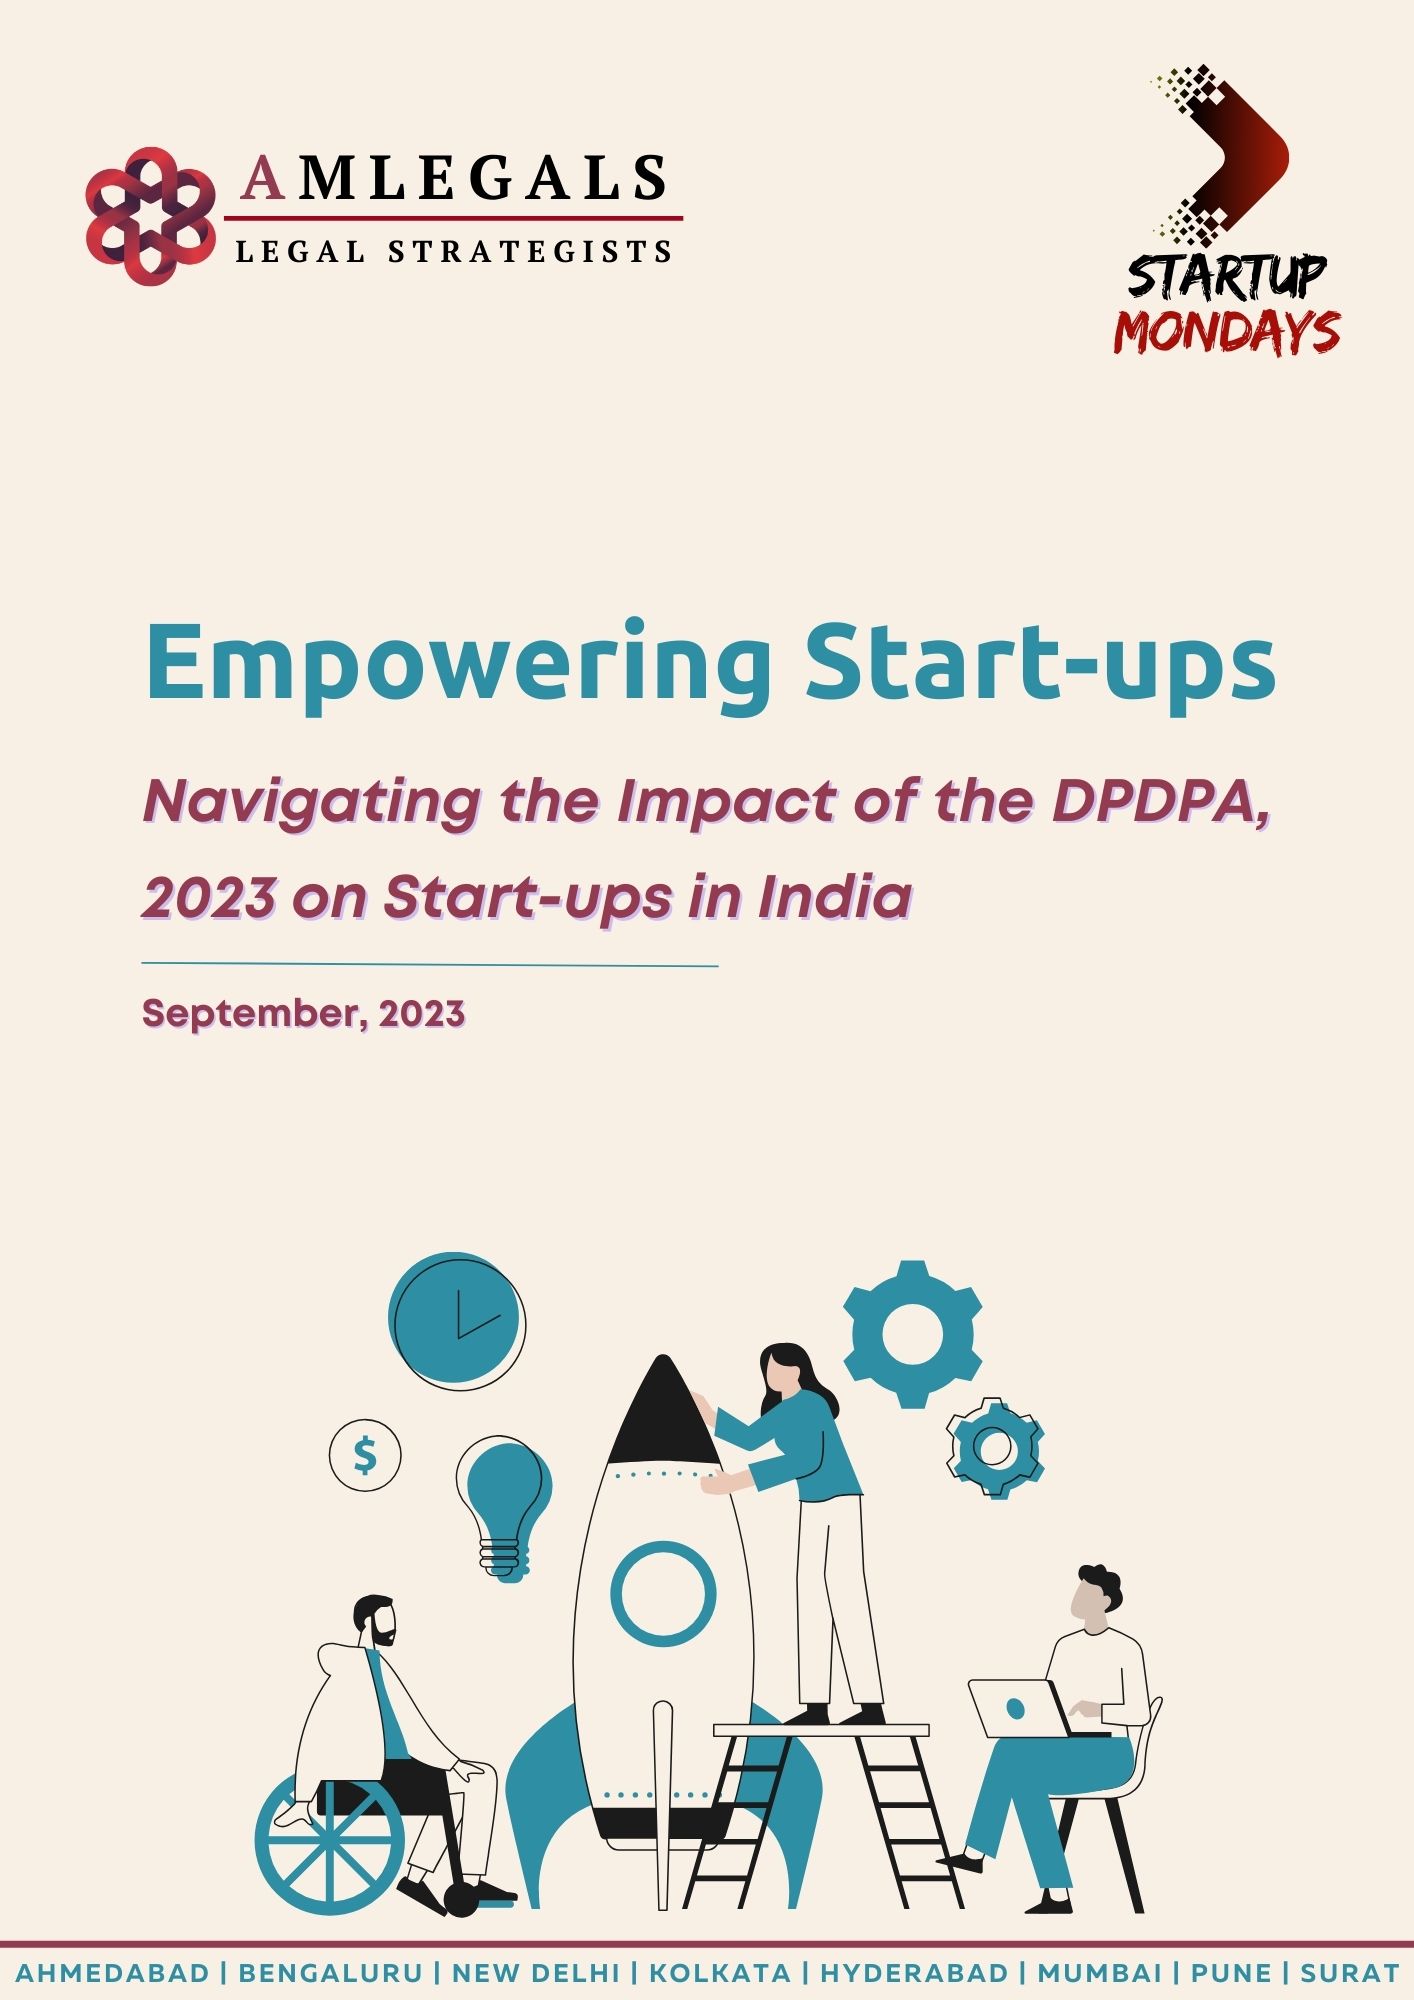 Navigating the Impact of the DPDPA, 2023 on Start-ups in India